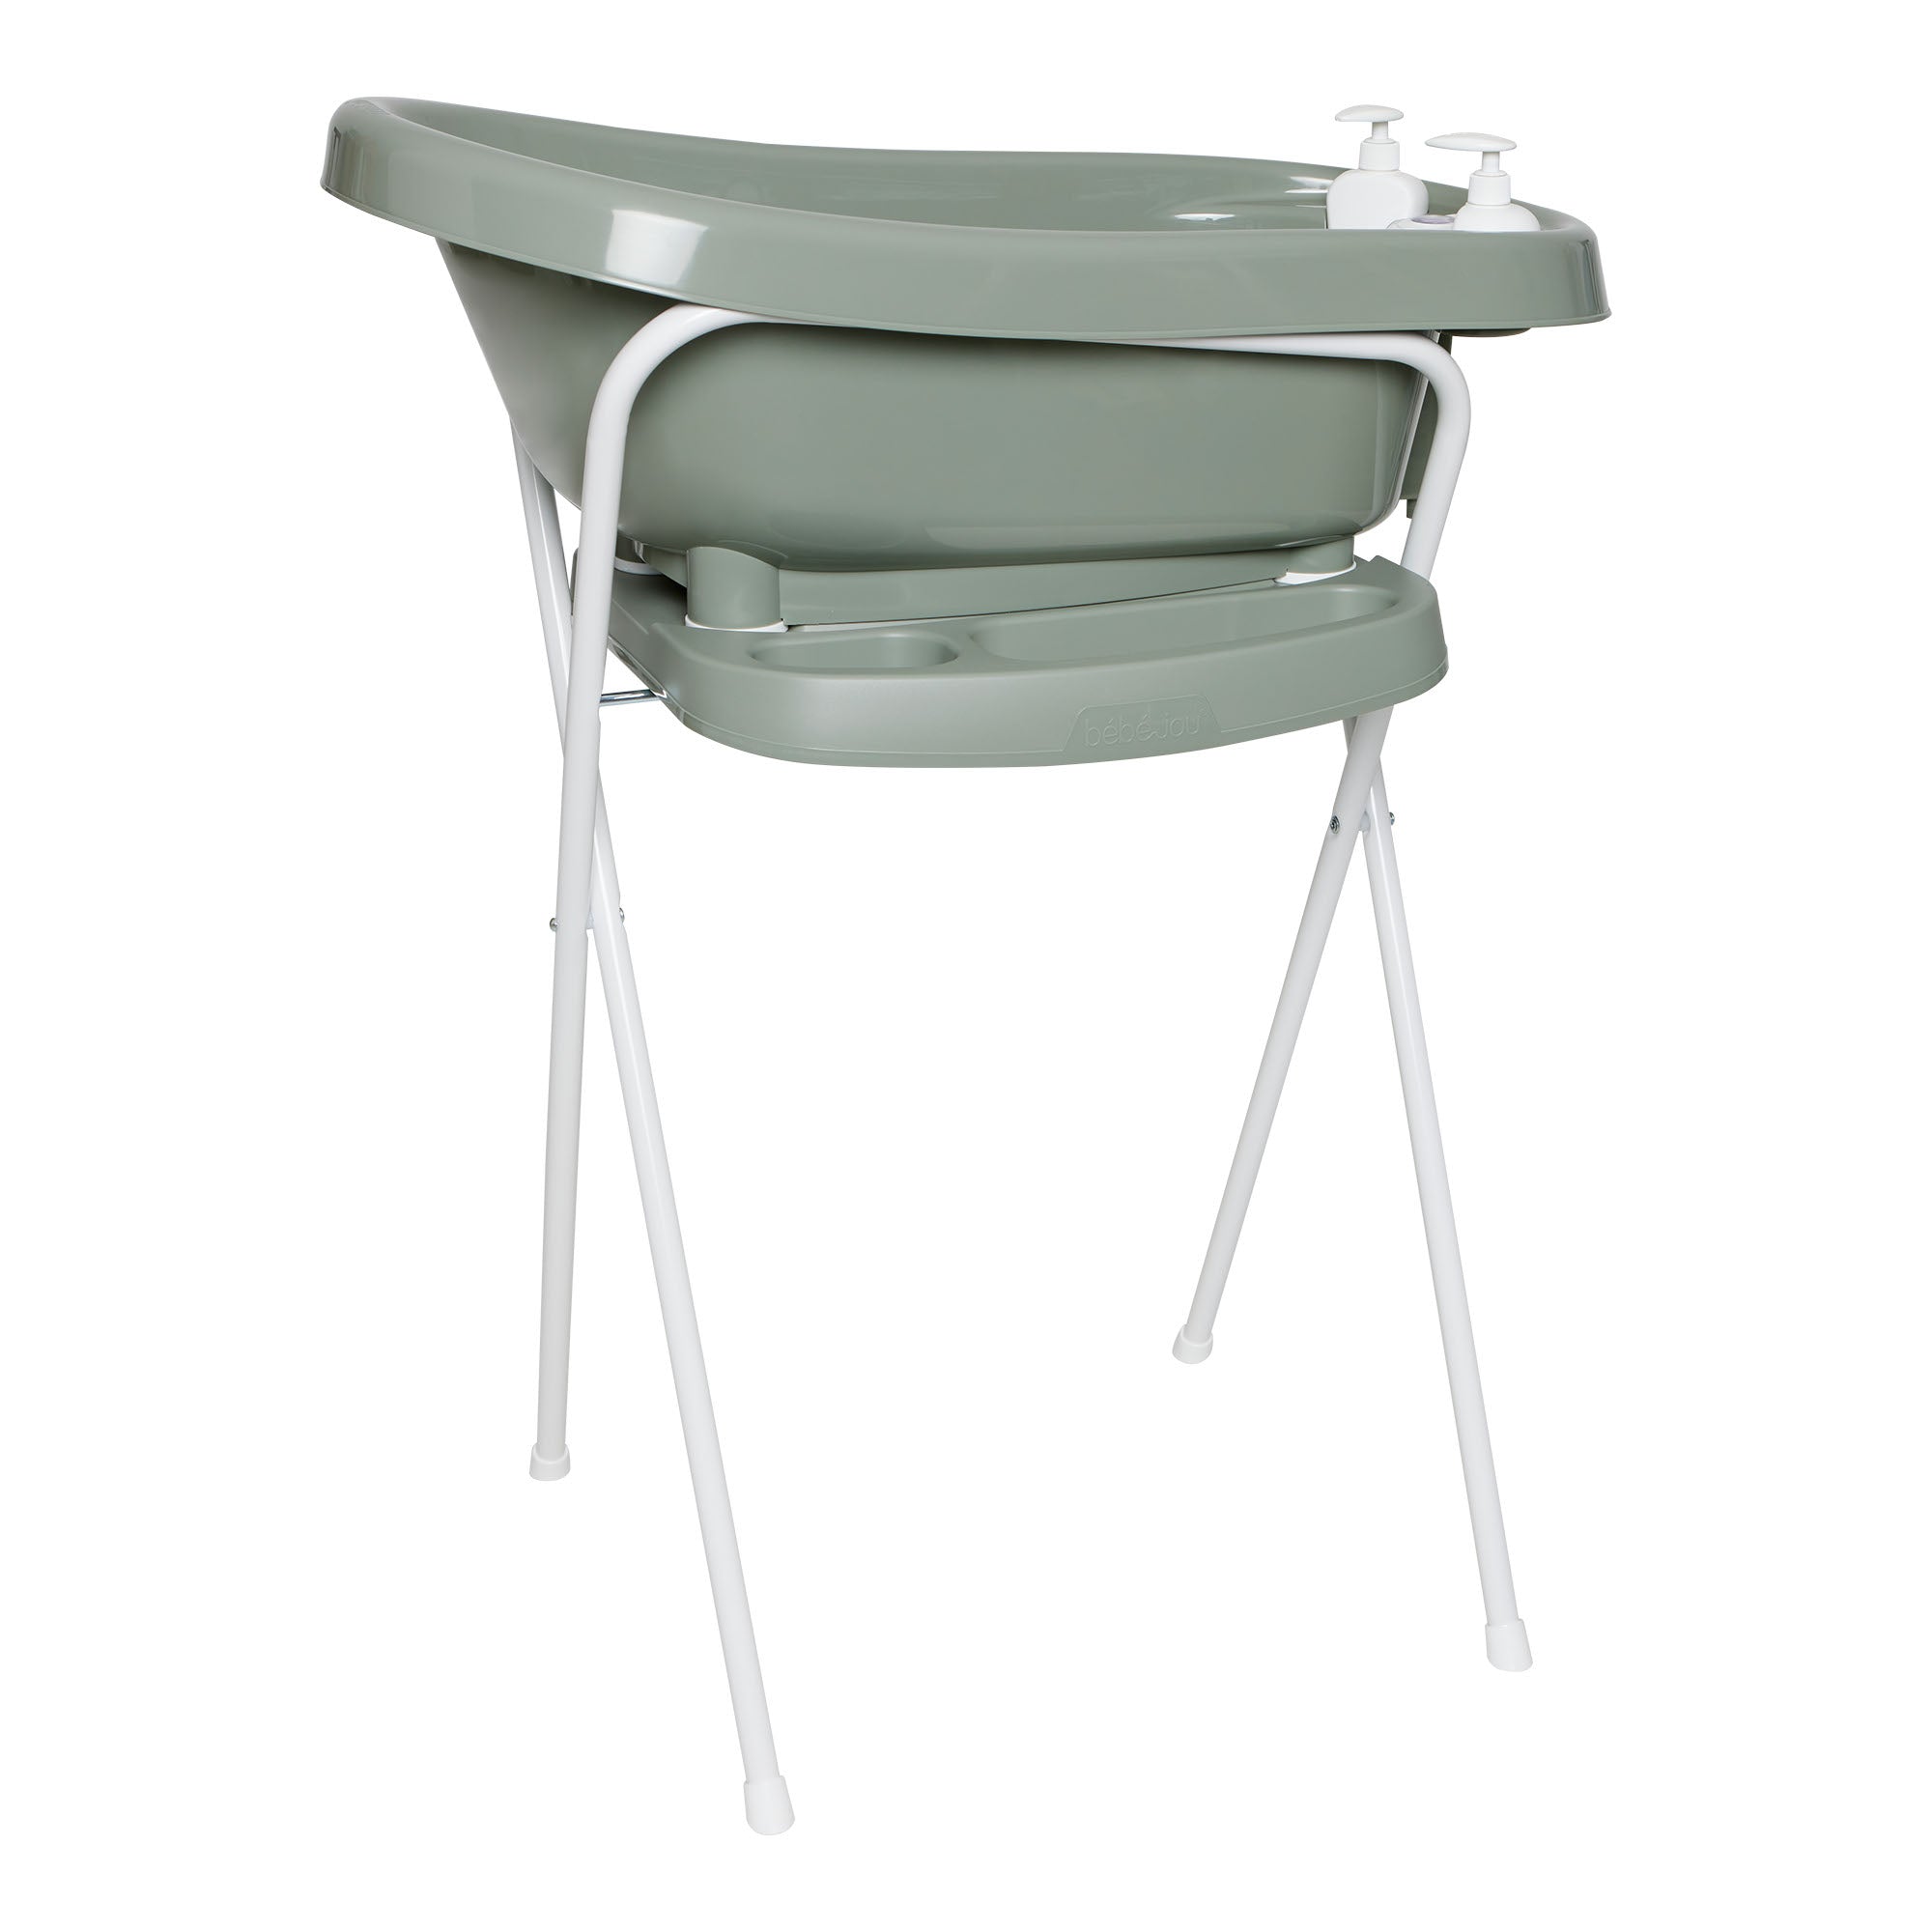 Terugbetaling huurling Moskee Baby Thermobad Breeze Green | Bébé-jou | Olive & Mint